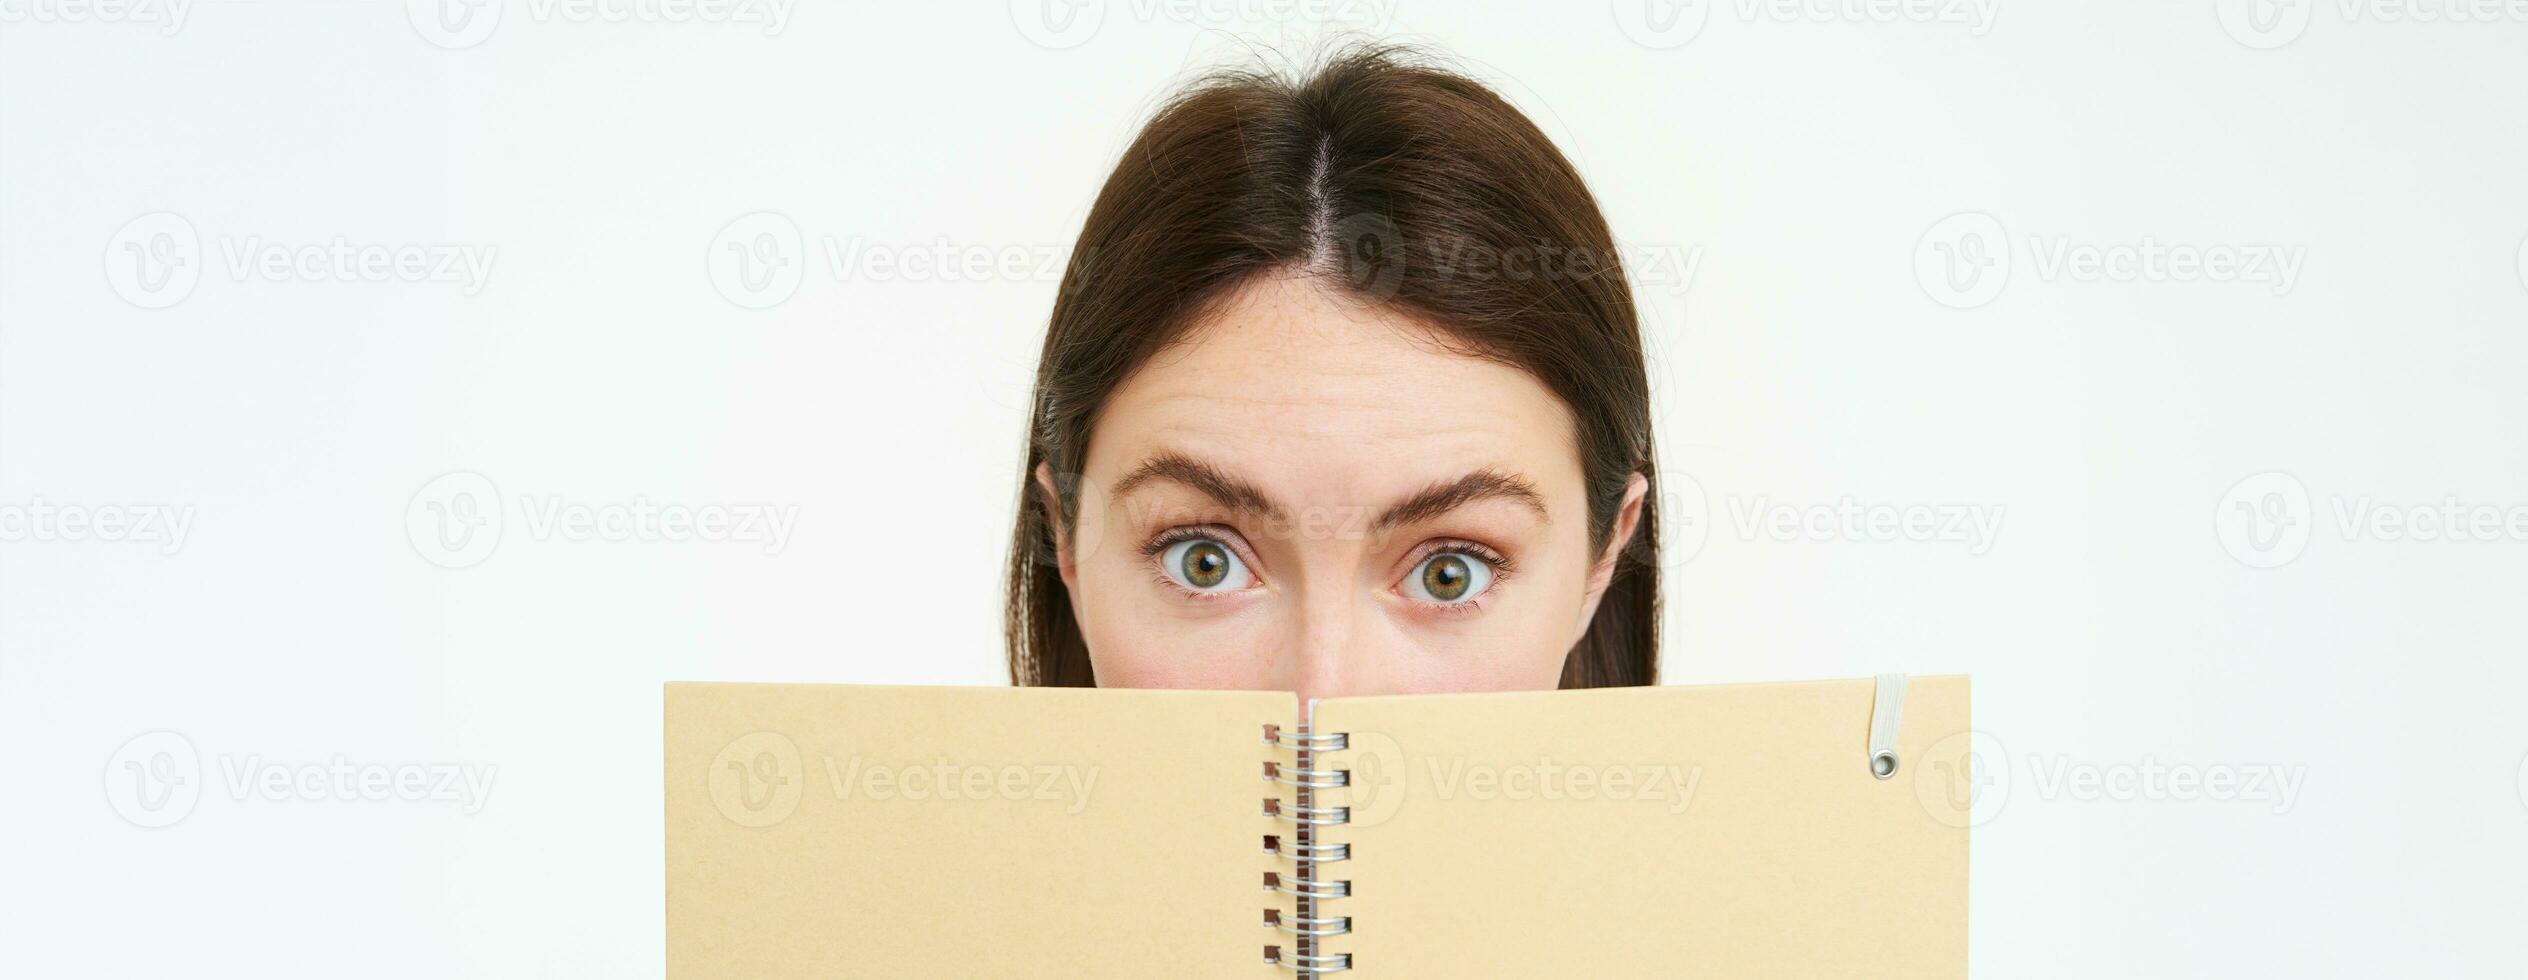 Close up portrait, half face of woman looking surprised, raising her eyebrows and staring at camera, holding notebook, daily planner organizer, isolated against white background photo